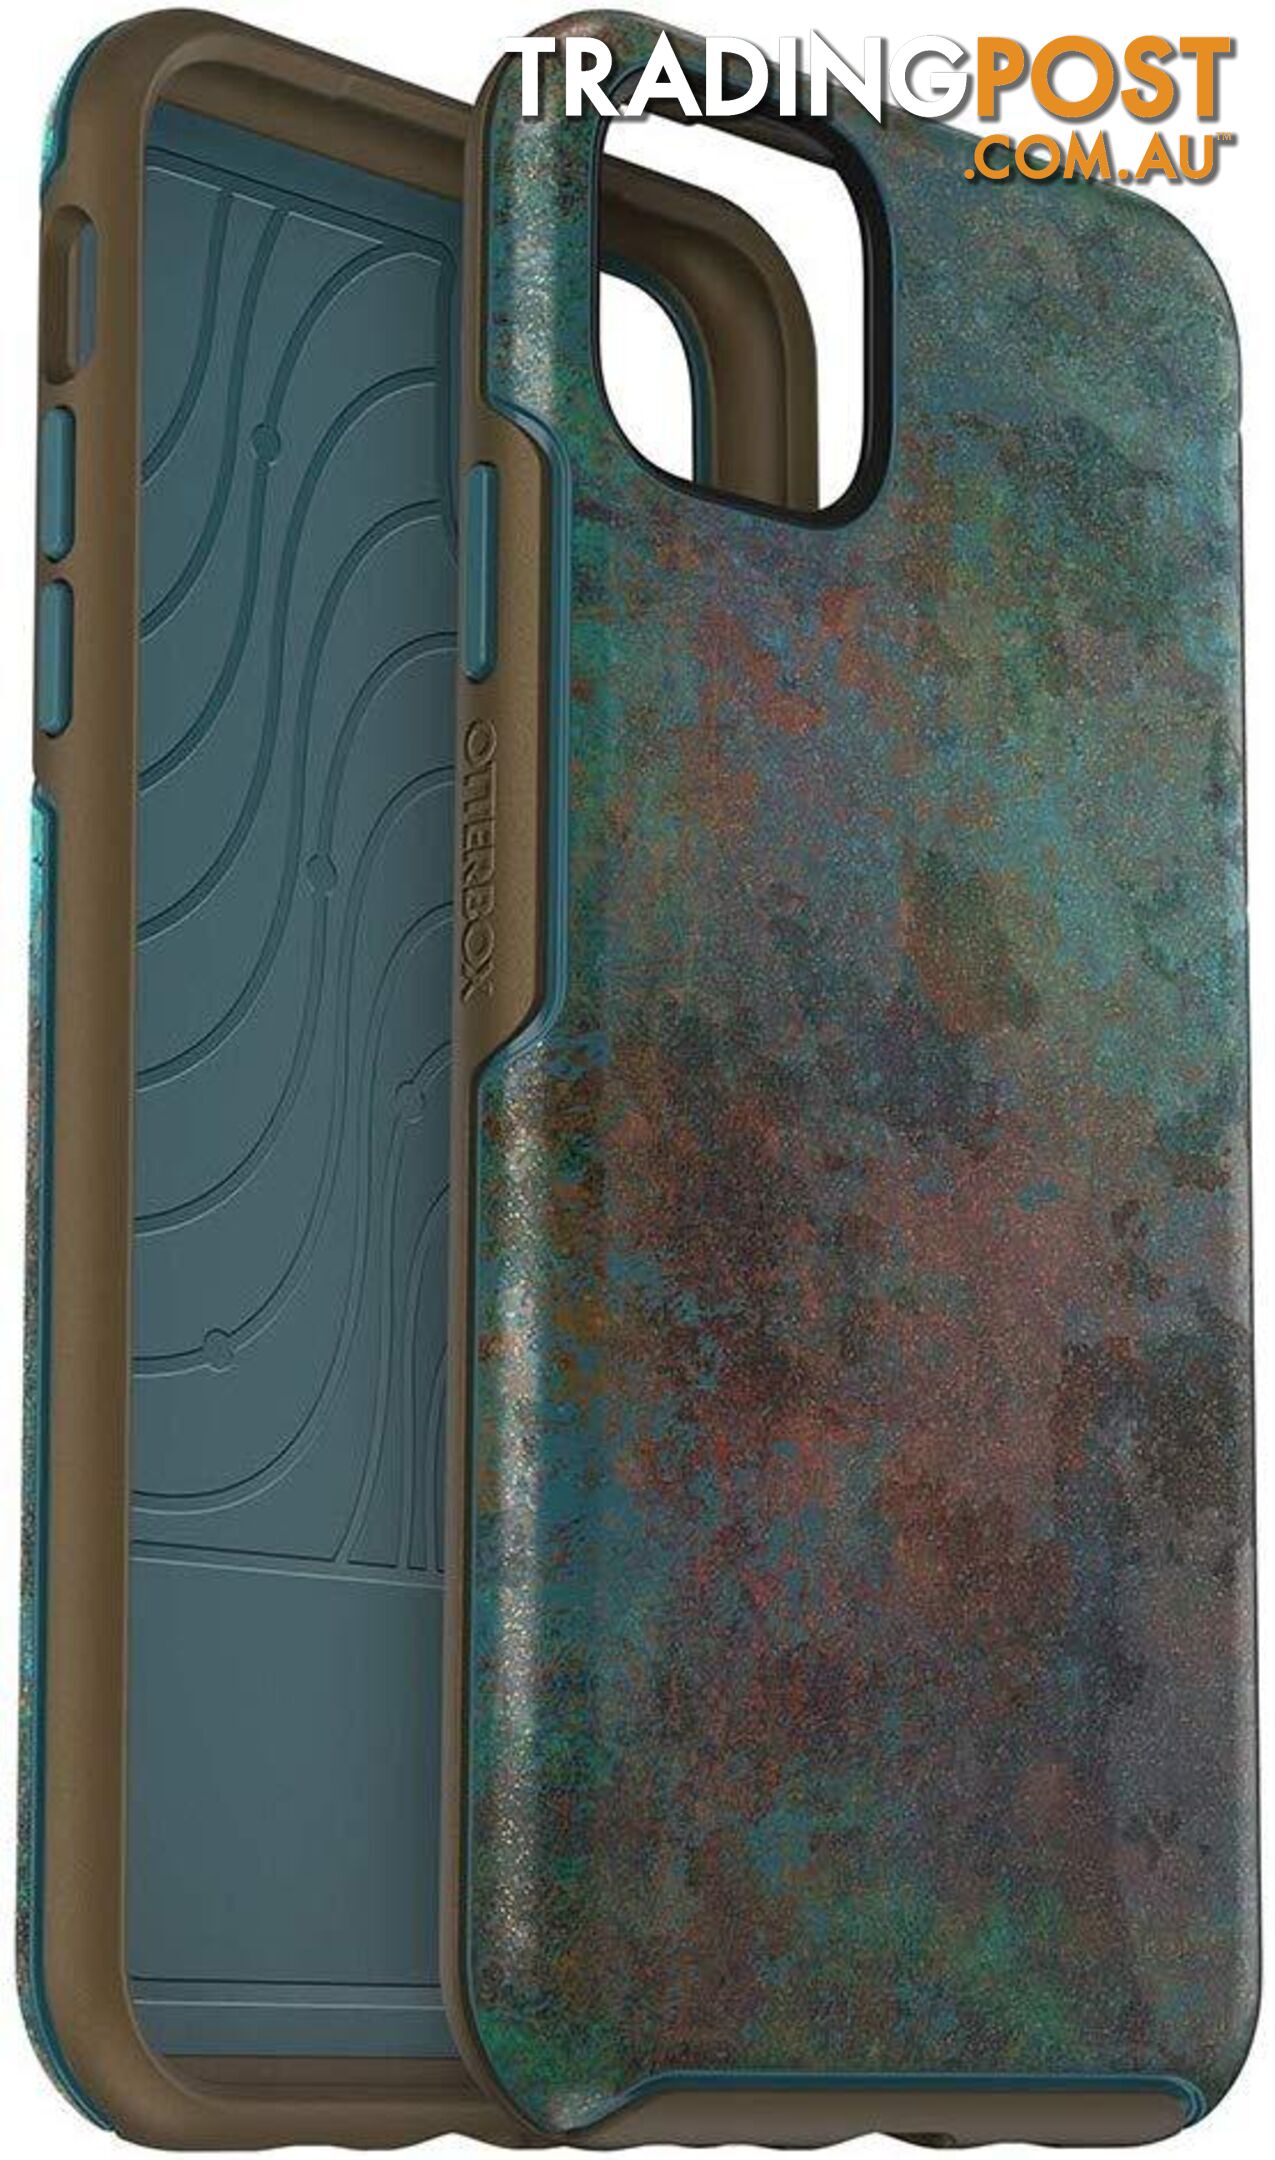 Otterbox Symmetry IML Case For iPhone 11 Pro Max - OtterBox - Feeling Rusty - 660543512639